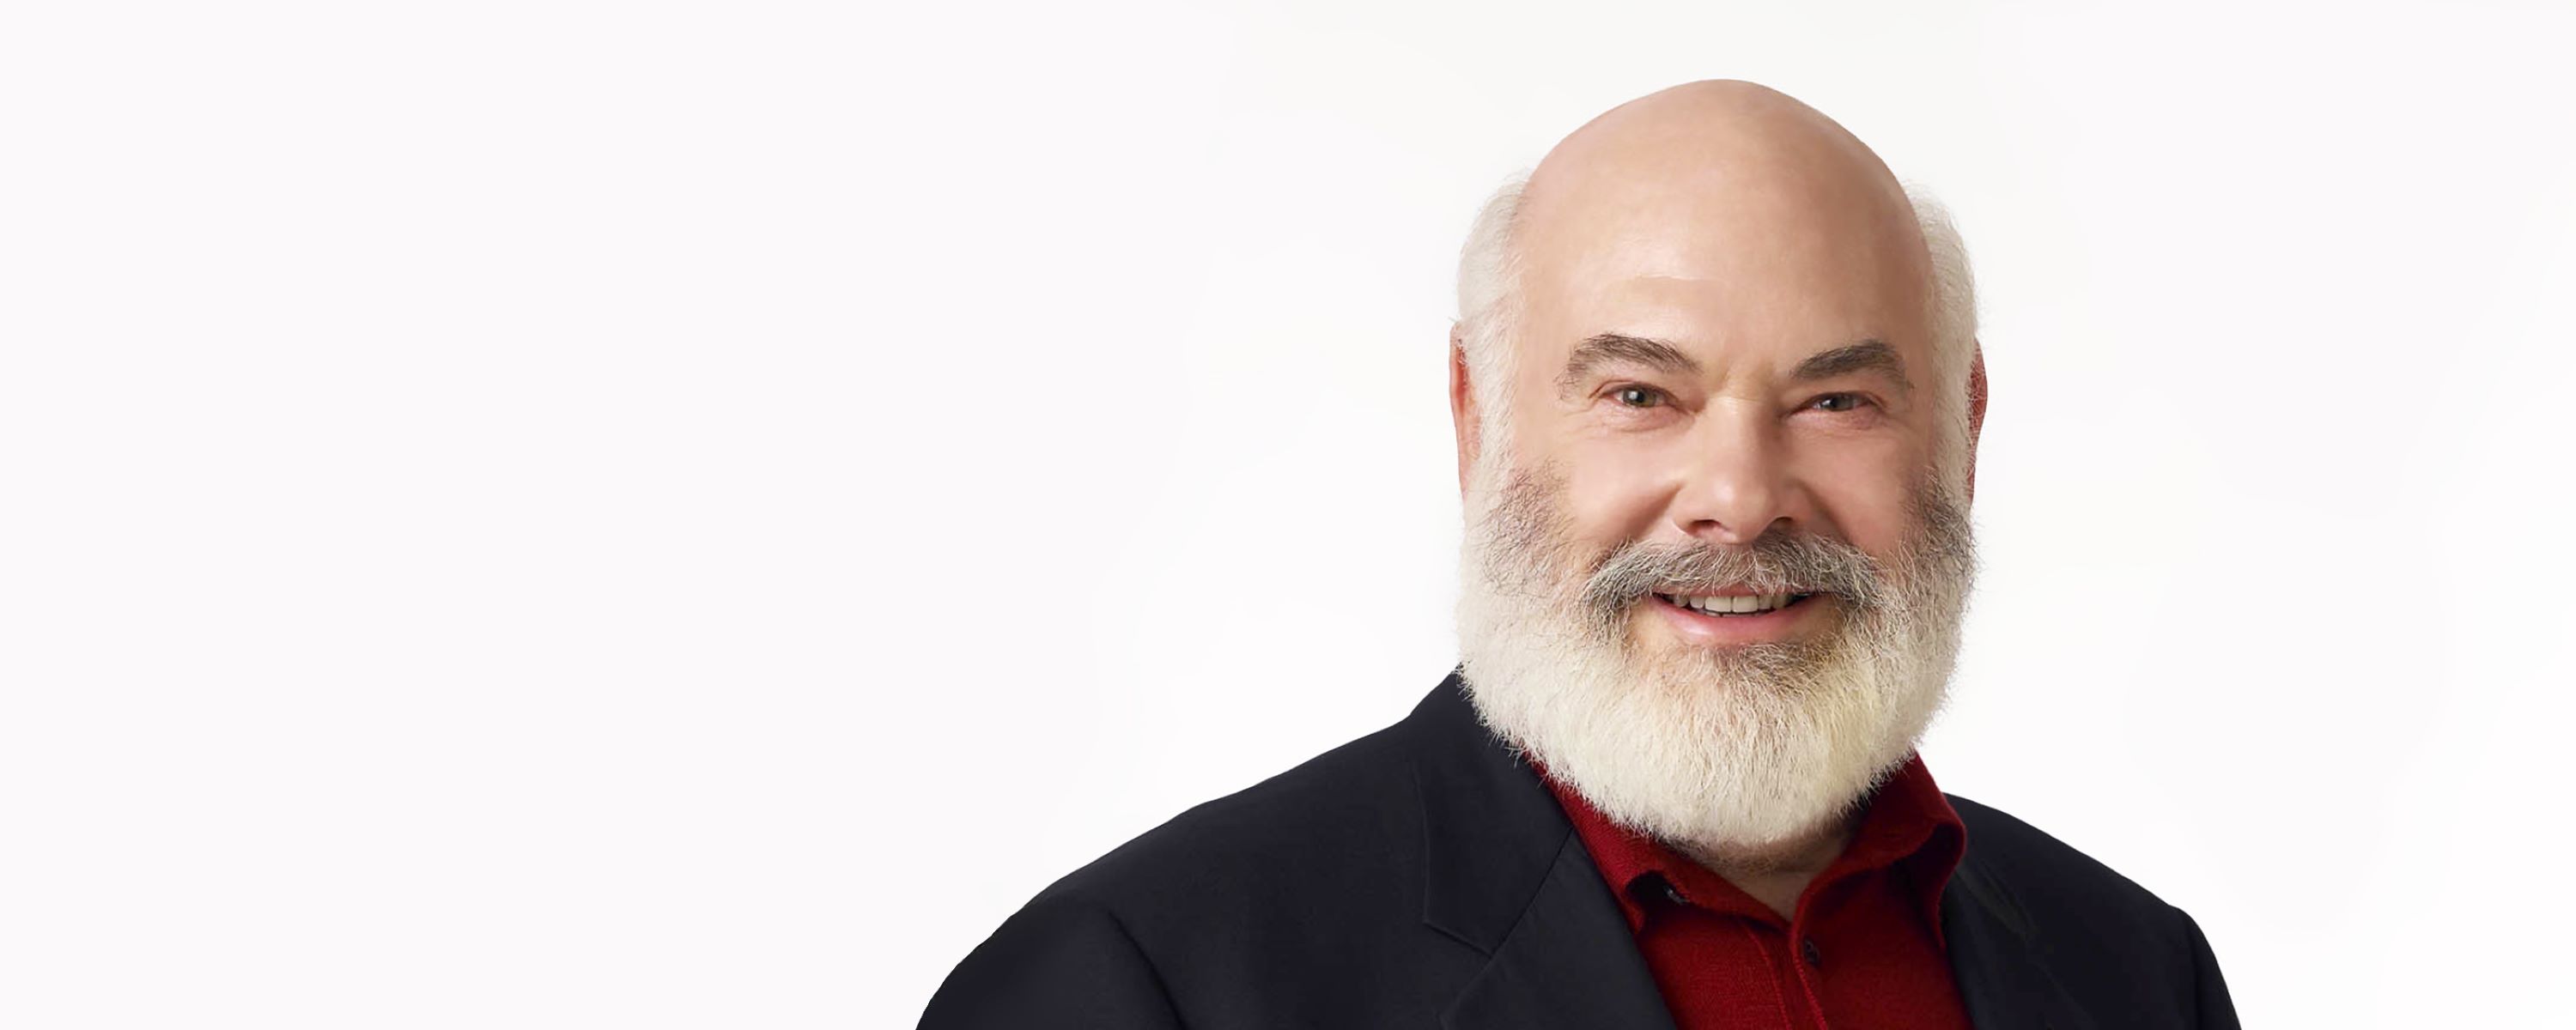 13-mind-blowing-facts-about-dr-andrew-weil